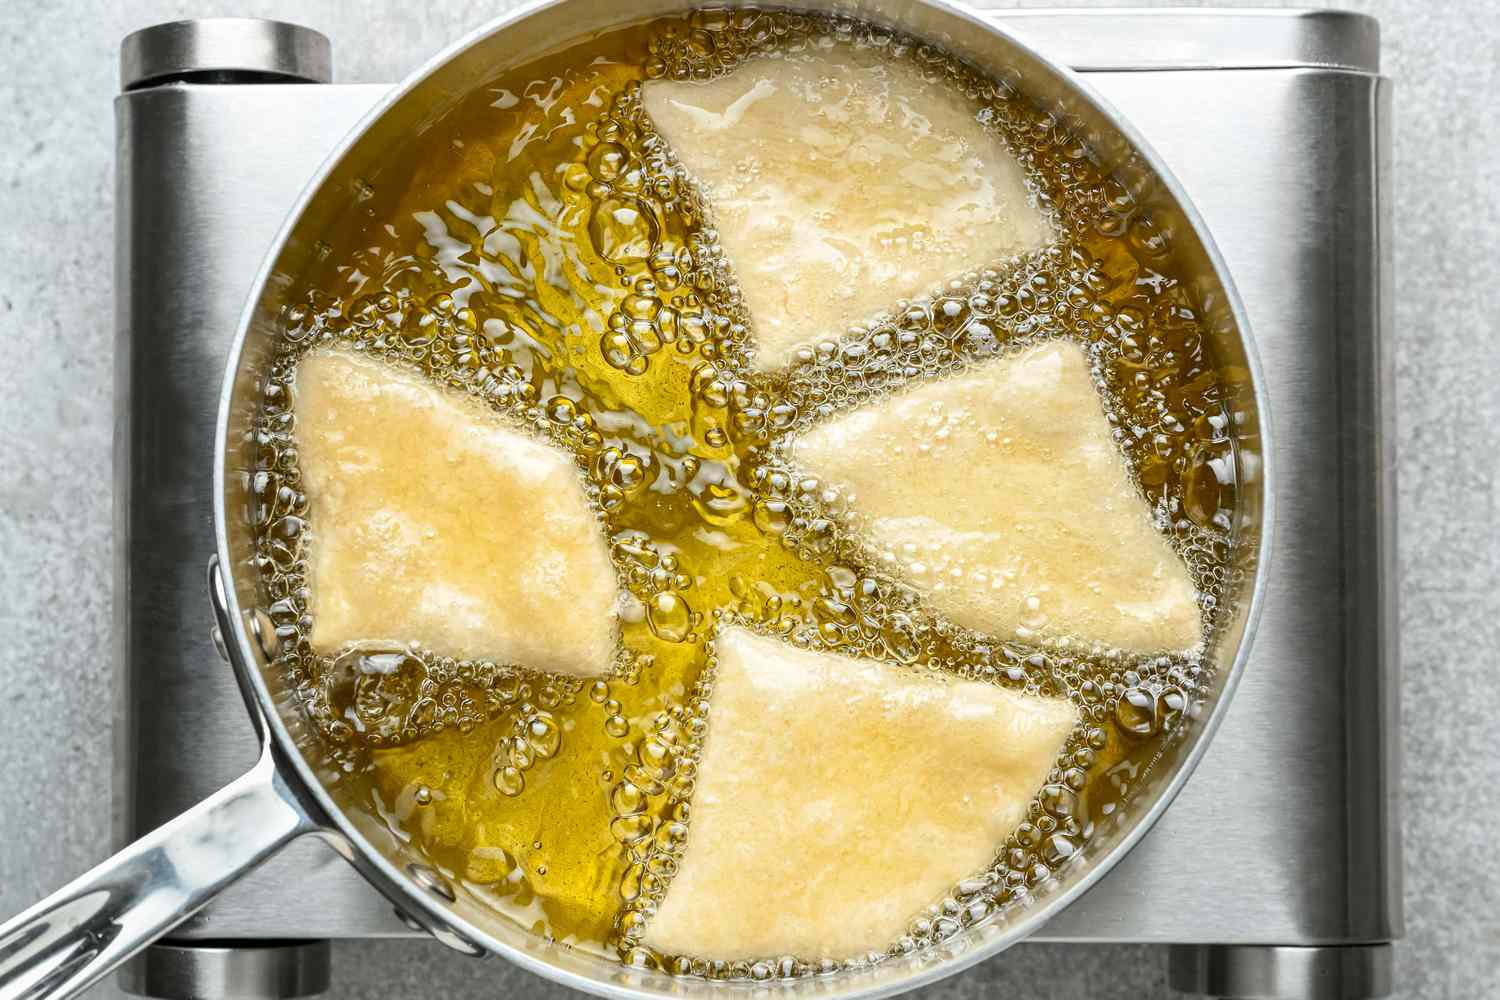 Four wedges of dough frying in a large pot of oil